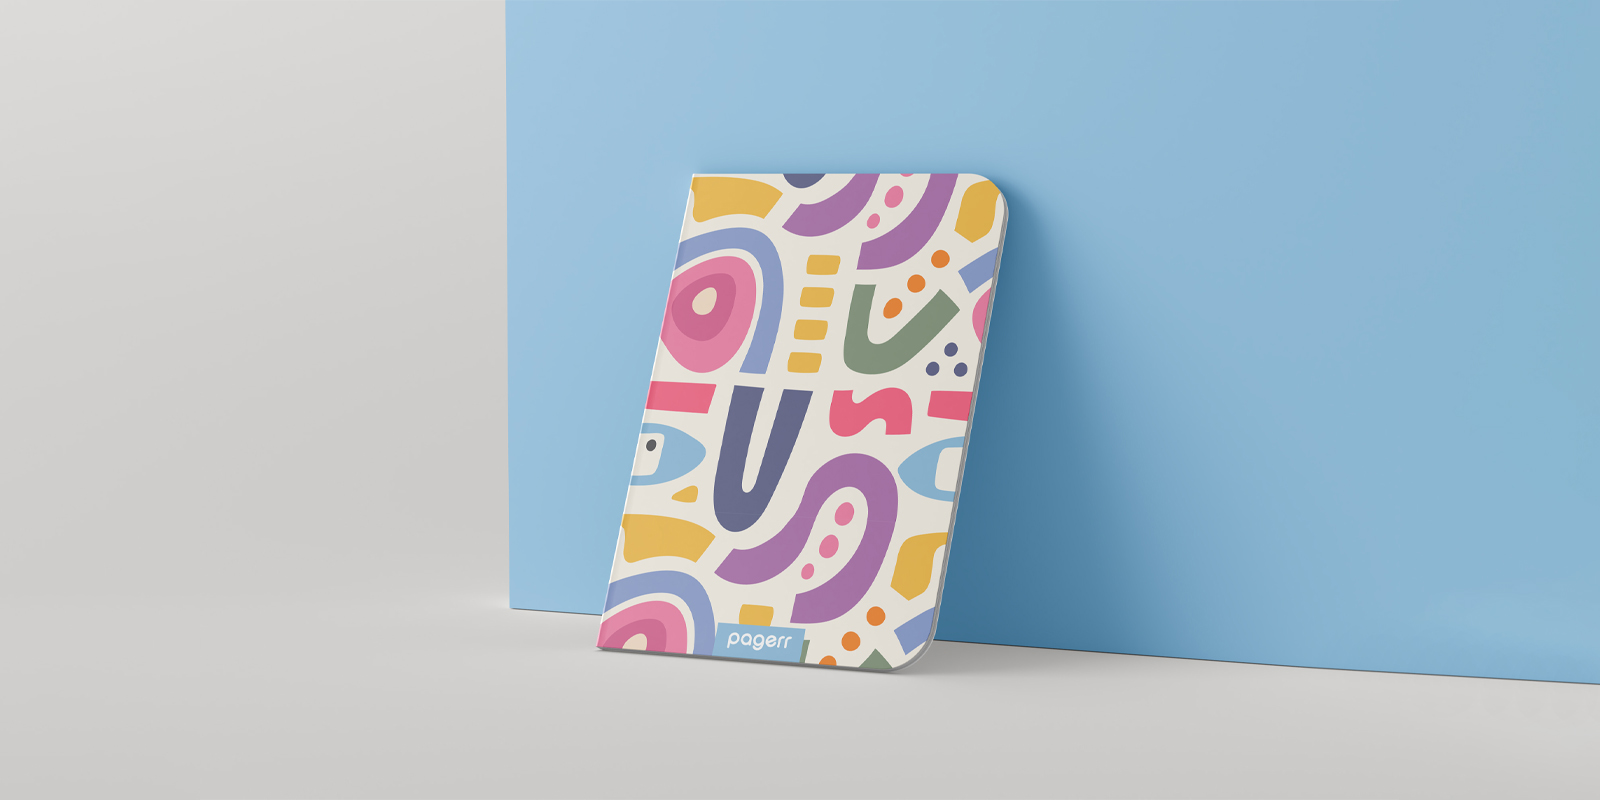 Stapled notebooks in Brisbane - Print with Pagerr